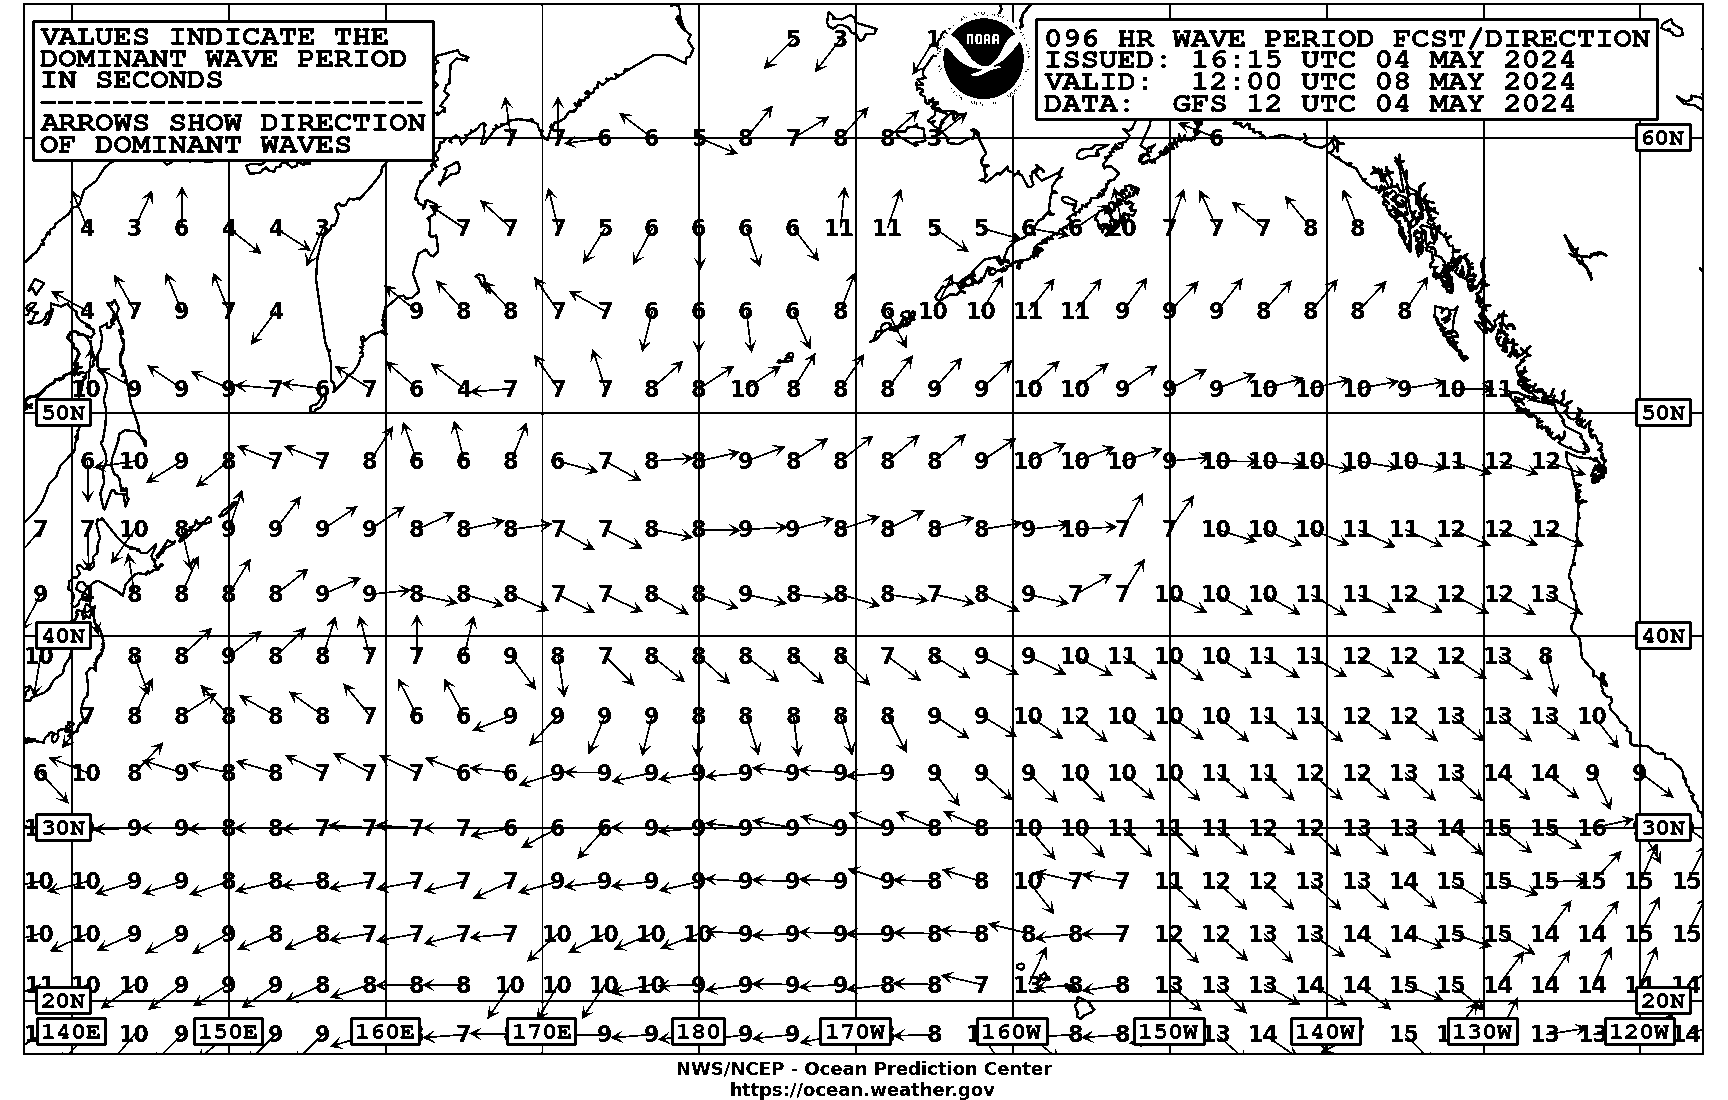 96 hour Pacific Peak Wave Period & Direction/Ice Accretion